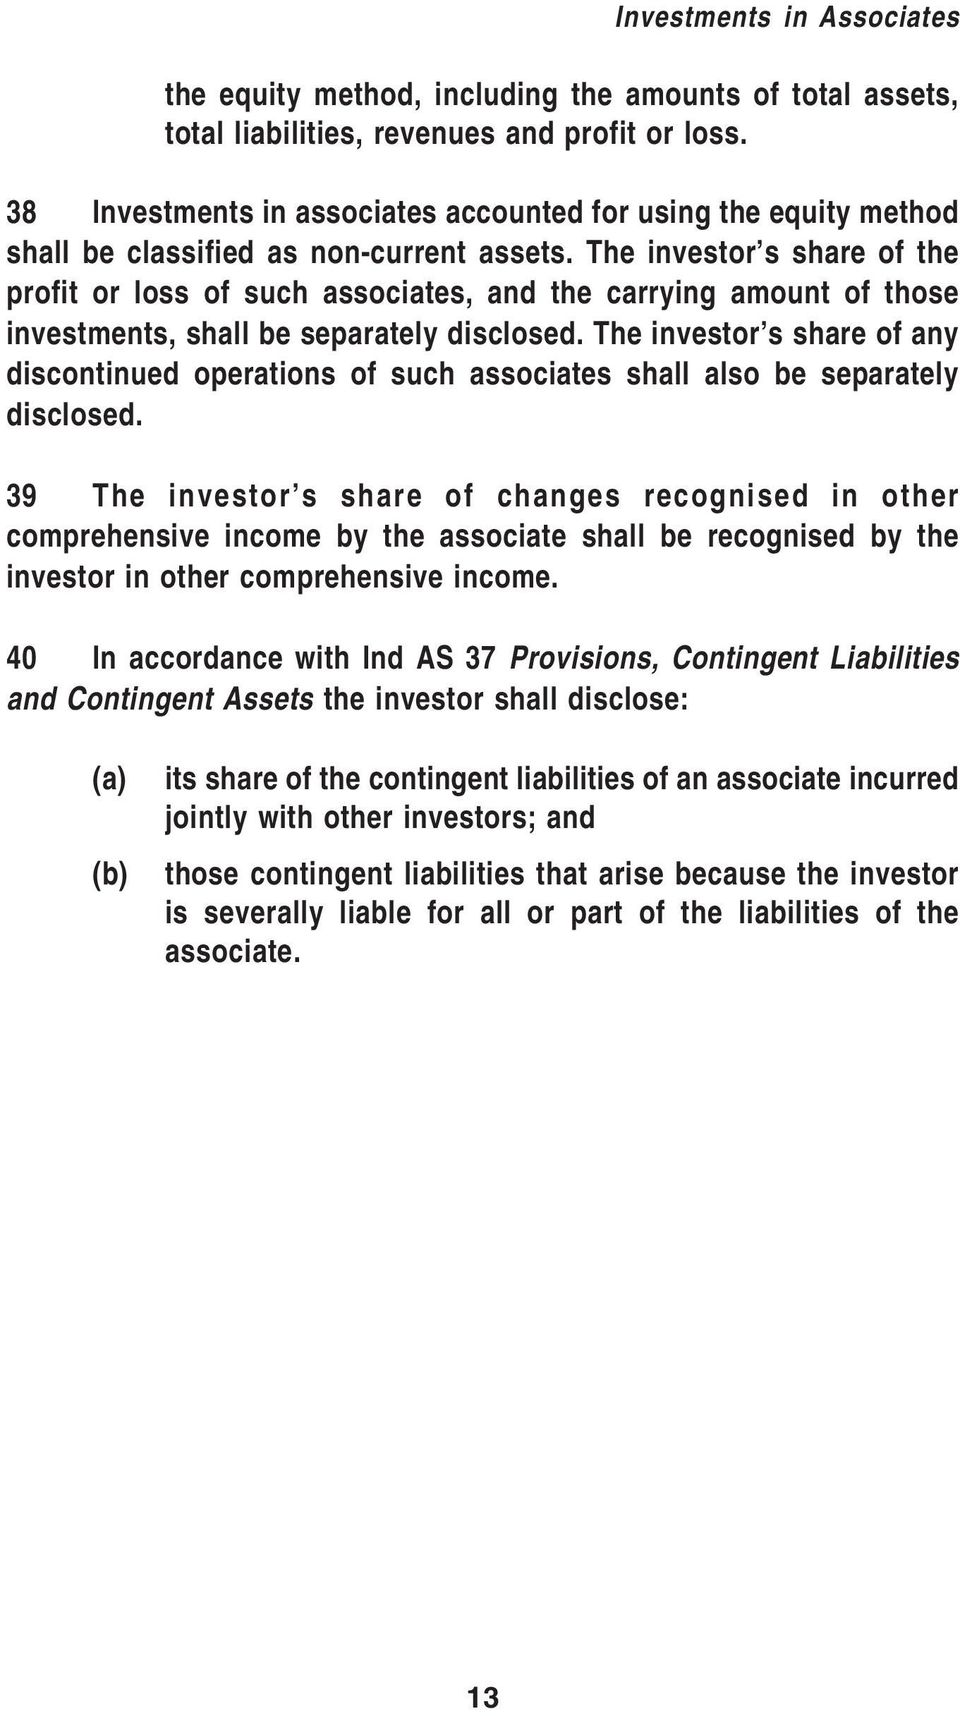 The investor s share of the profit or loss of such associates, and the carrying amount of those investments, shall be separately disclosed.